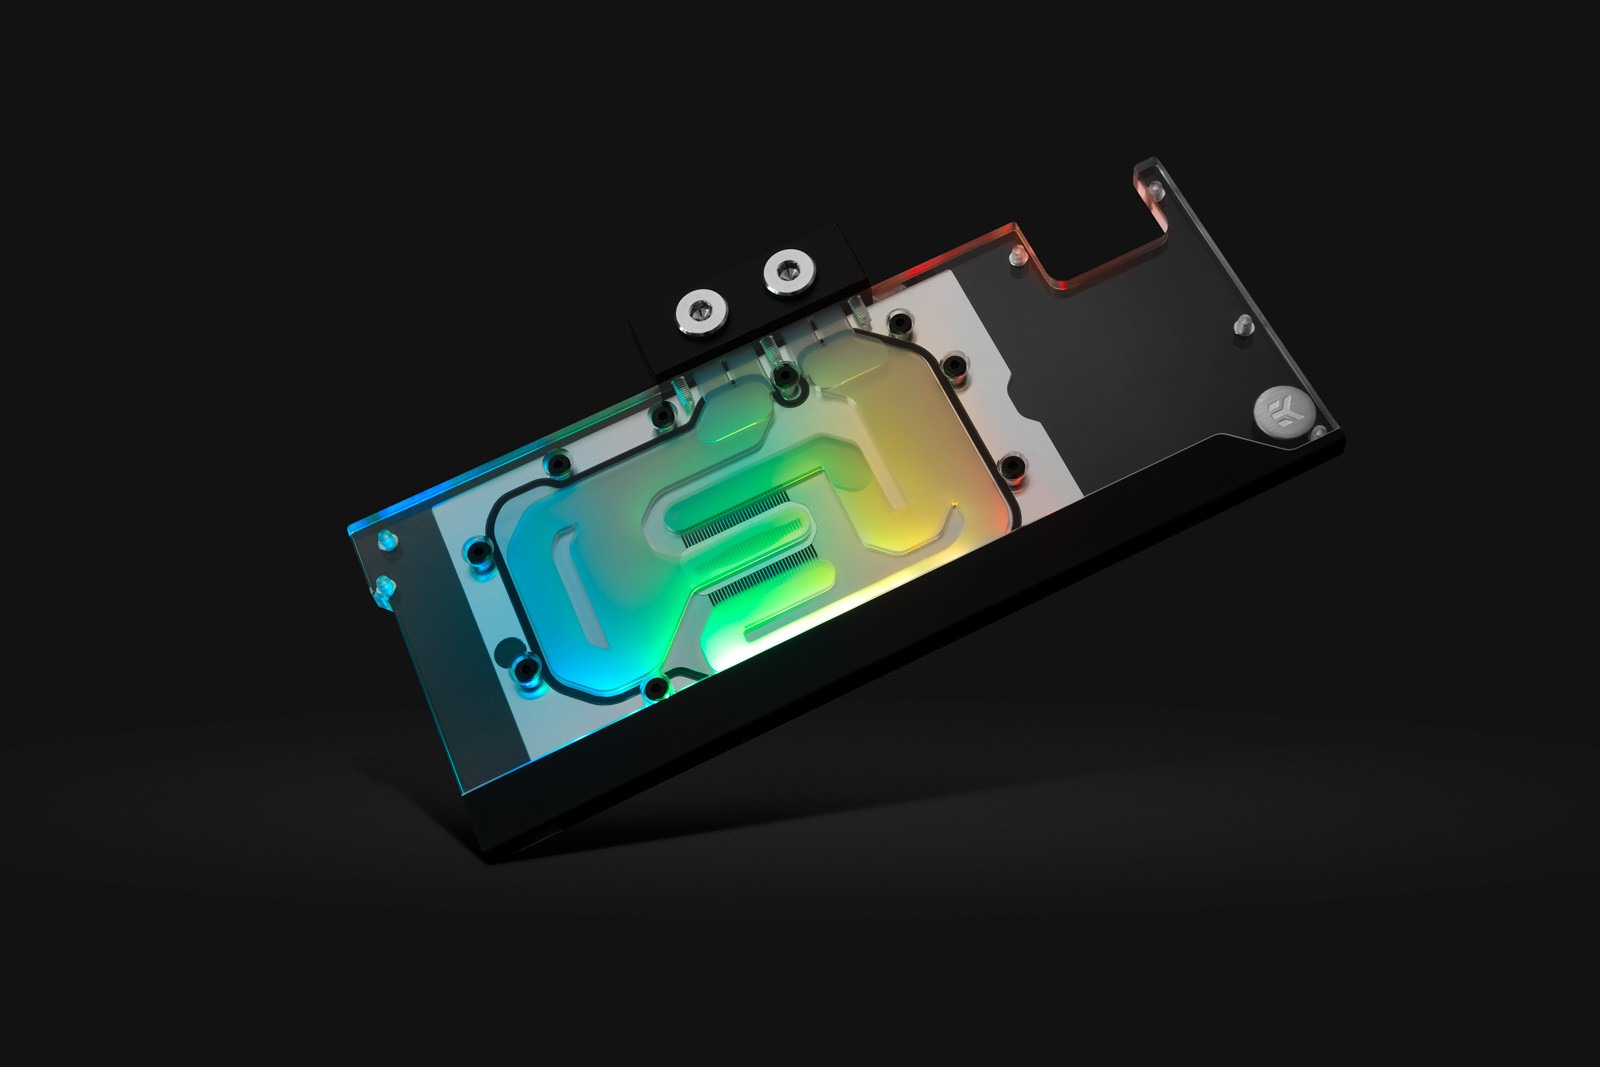 EK announces Classic waterblock for AMD Radeon RX 6900 and RX 6800 graphics cards -